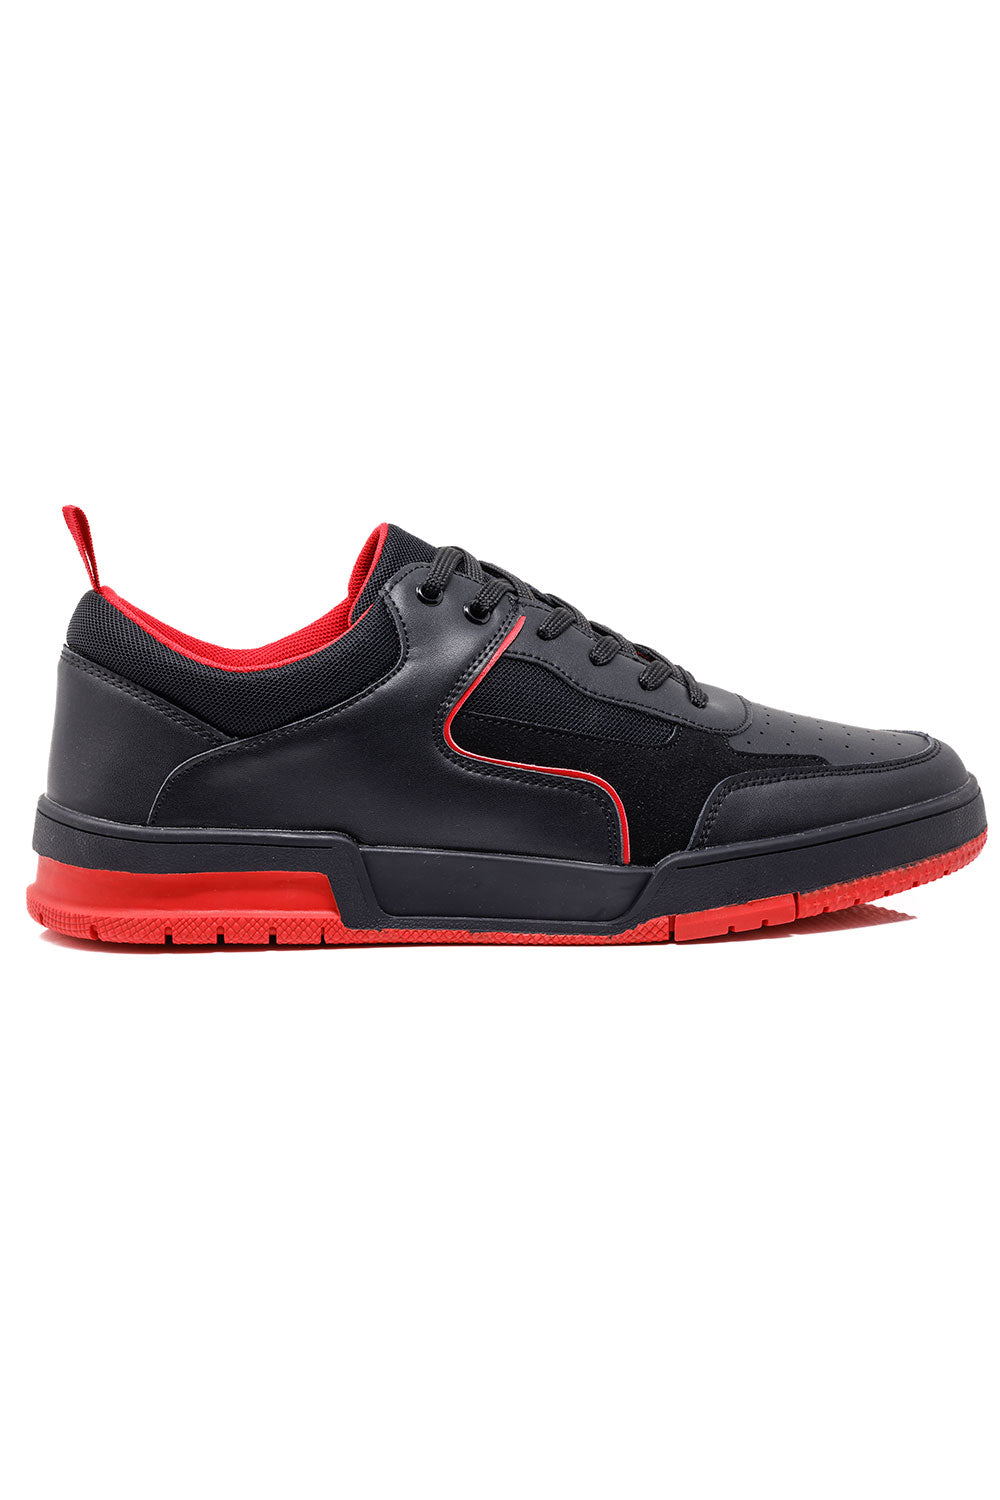 Barabas Men's Low Top Laced-Up Premium PU Leather Sneakers 4SK10 Black Red